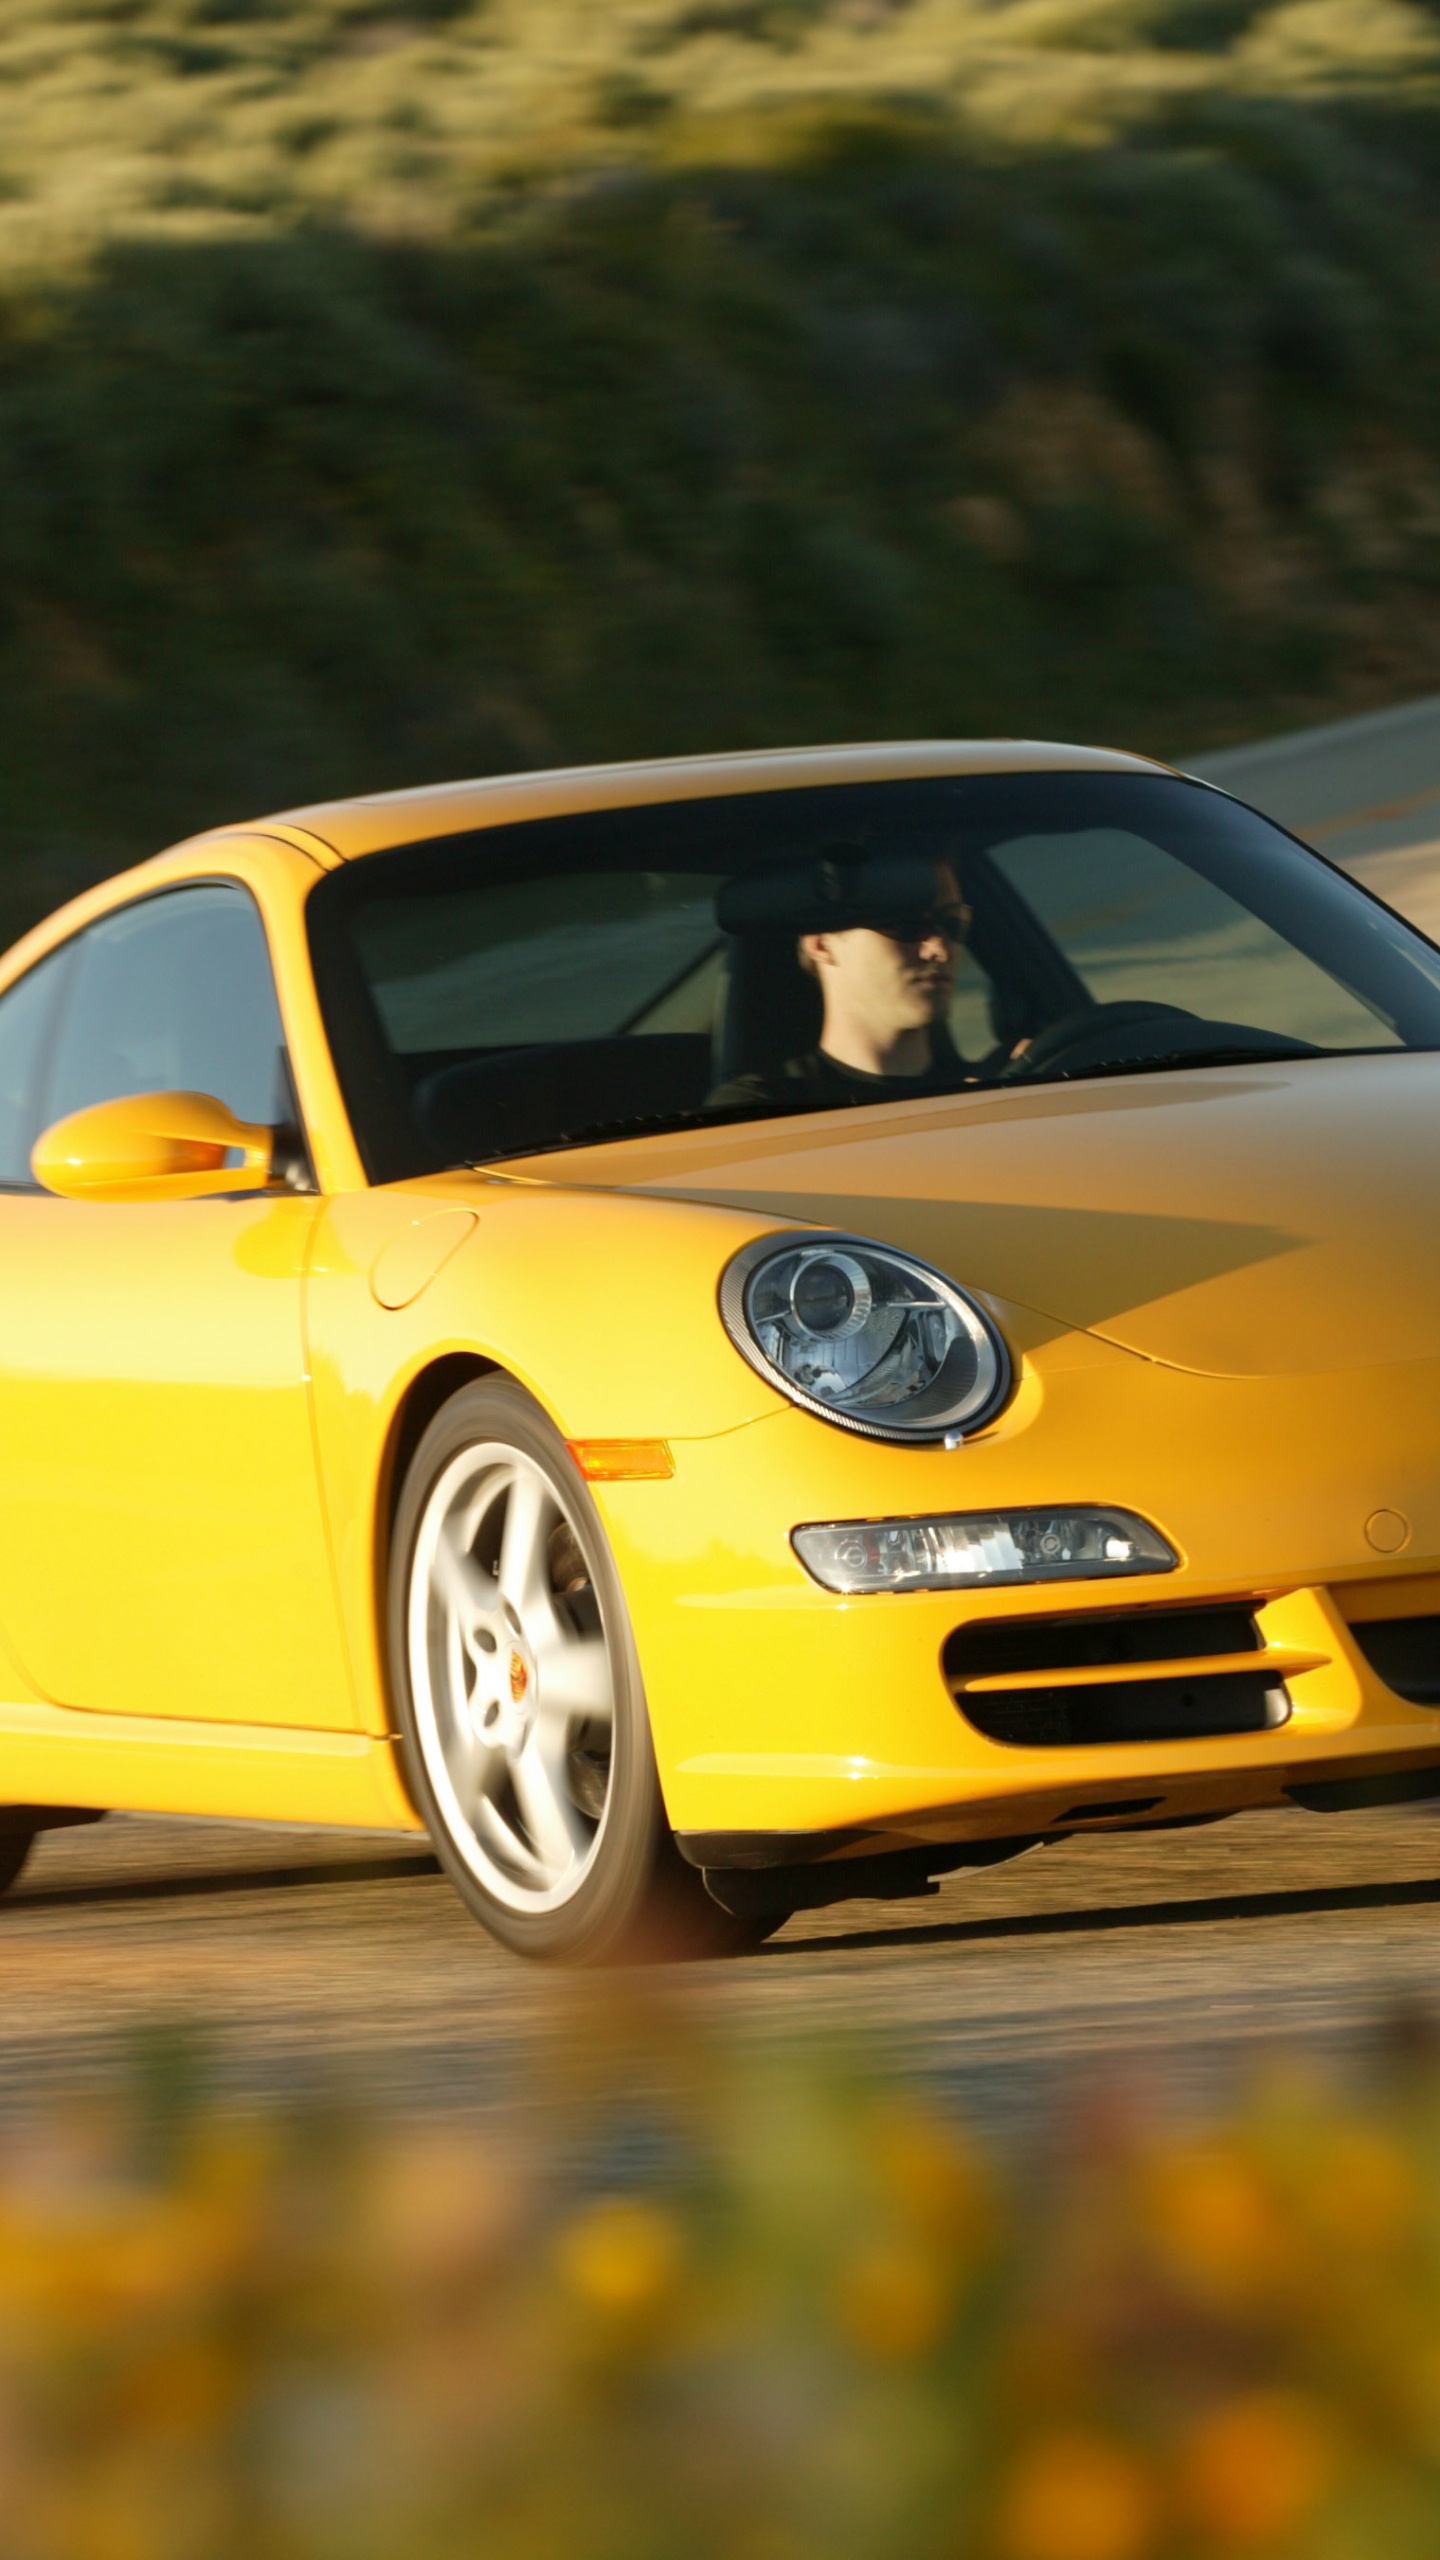 Yellow Porsche 911 on Road During Daytime. Wallpaper in 1440x2560 Resolution